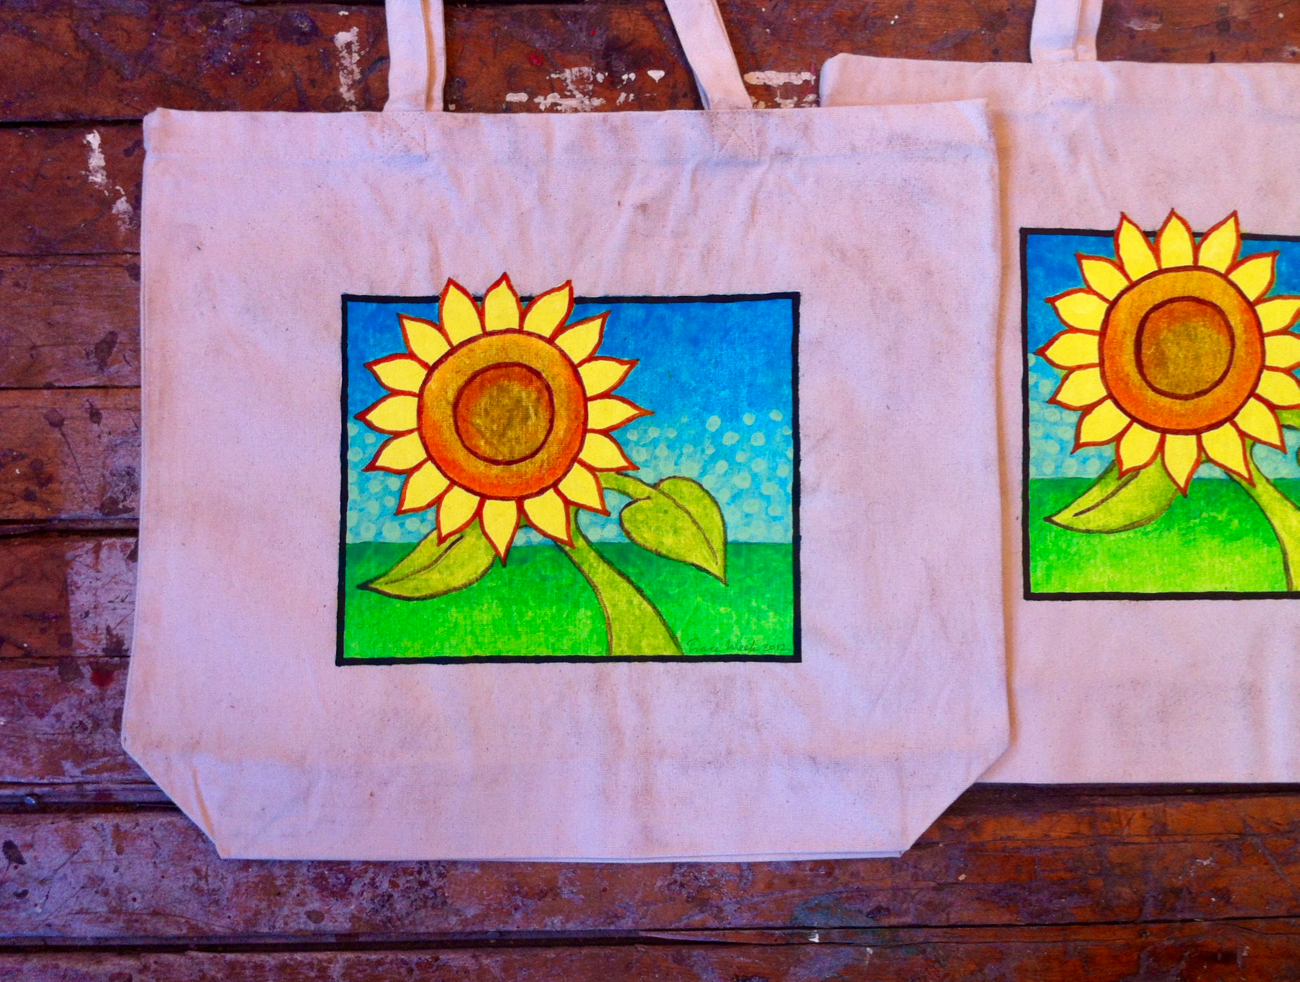 Sunflower Image on Bags